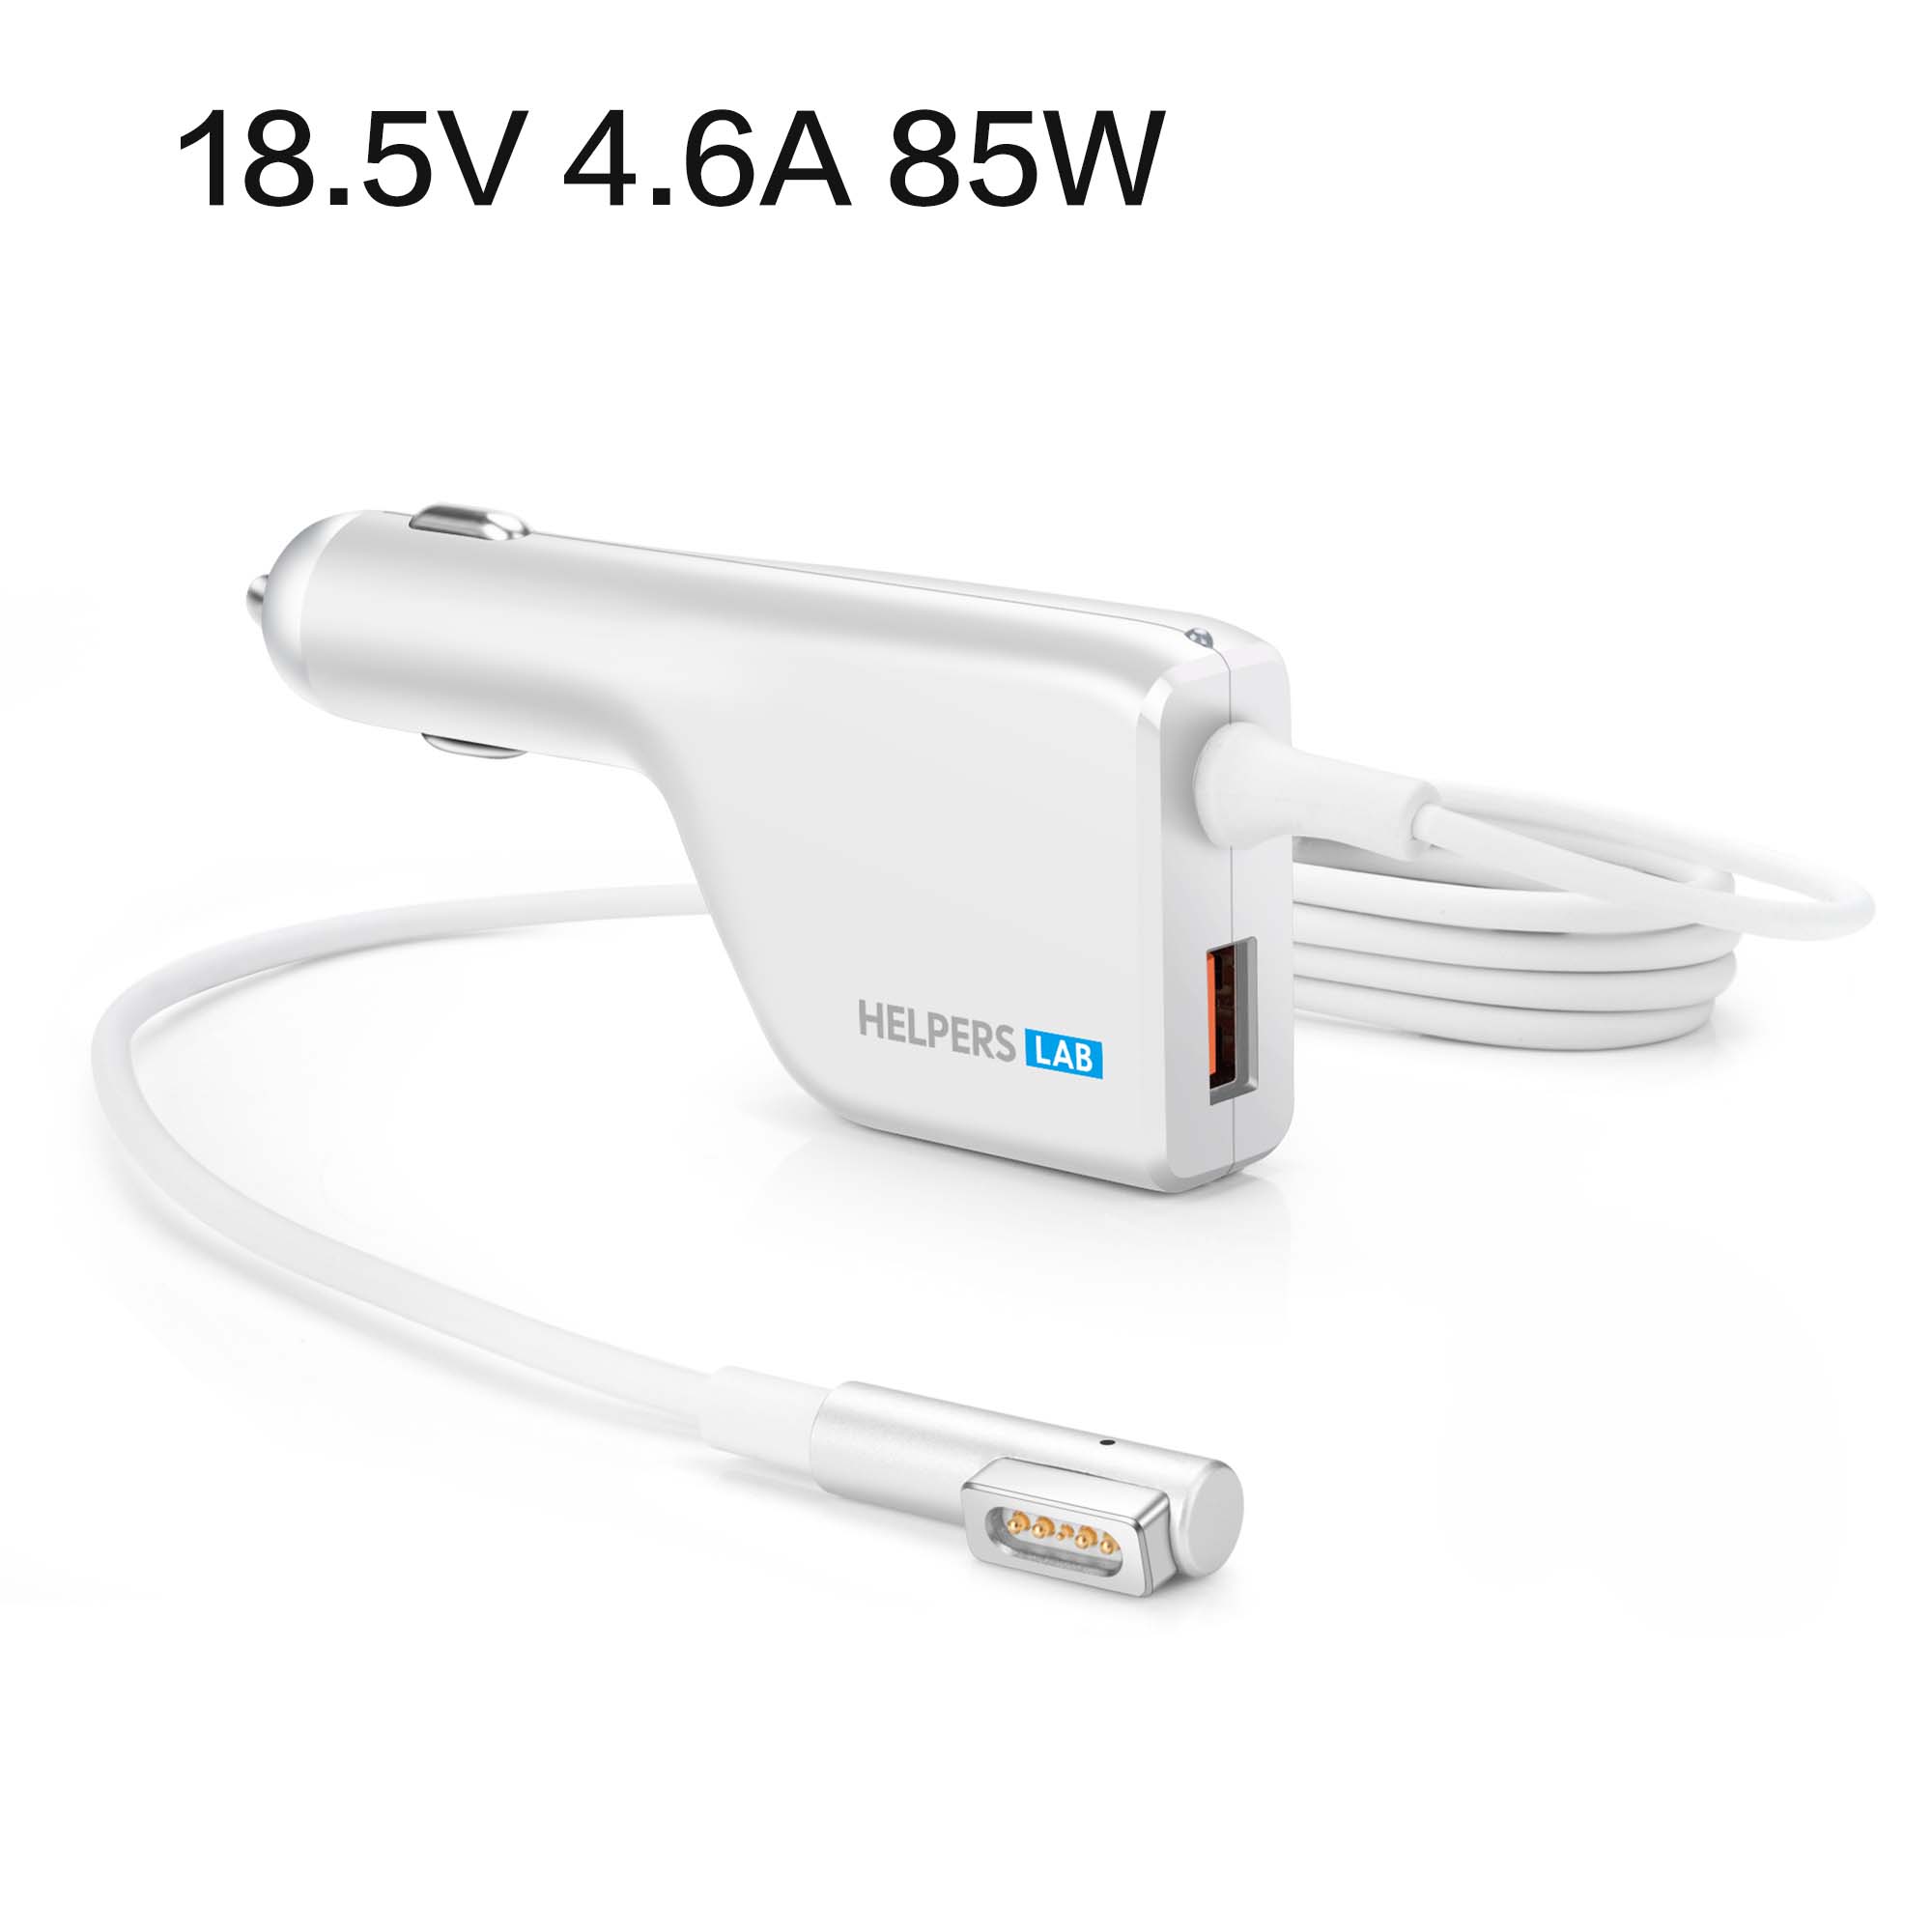 85W 18.5V 4.6A Magsafe L Car Charger Adapter Power Supply For Apple Helpers Lab